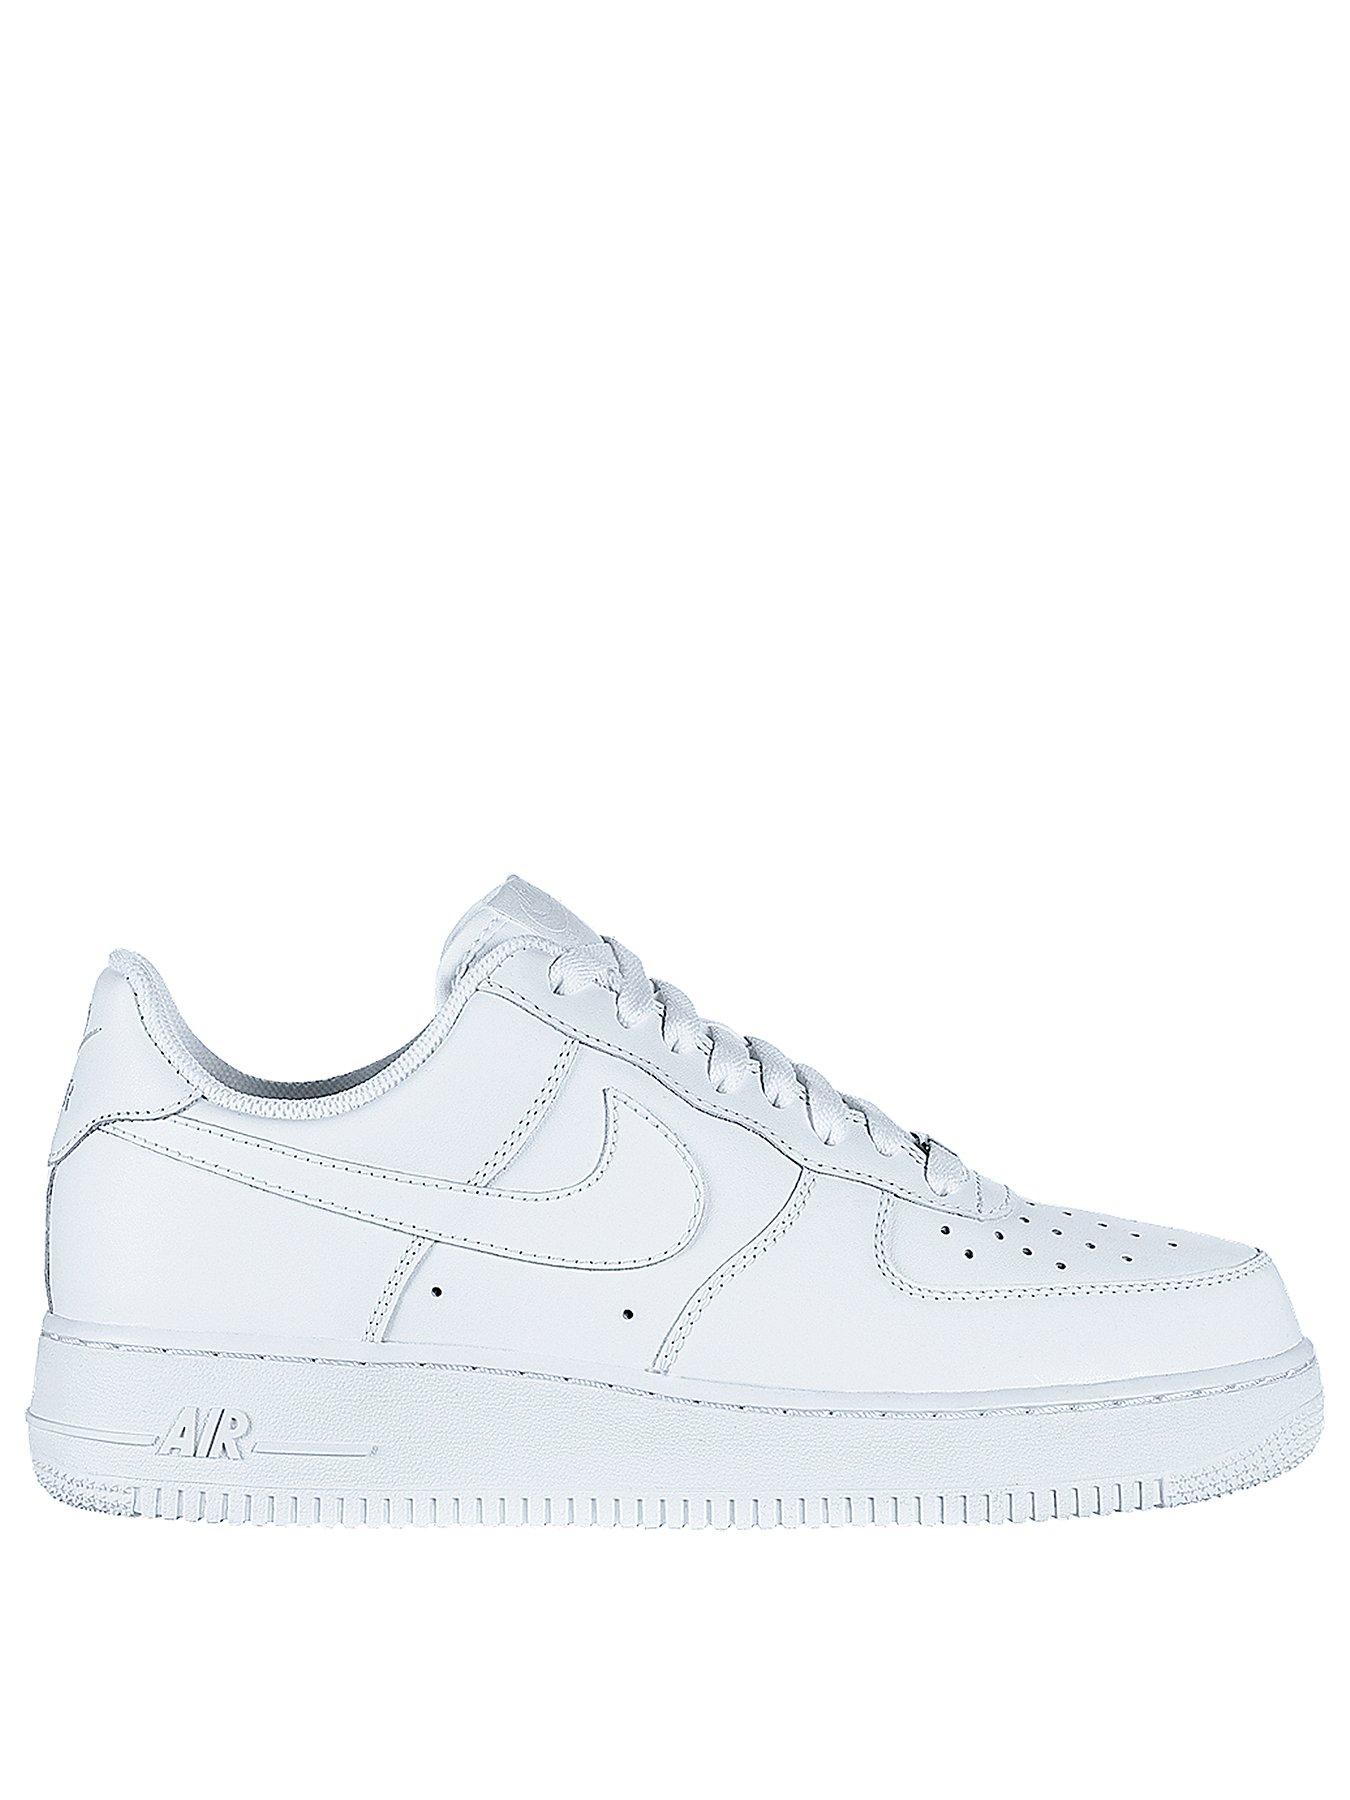 Nike Air Force 1 '07 Trainers 